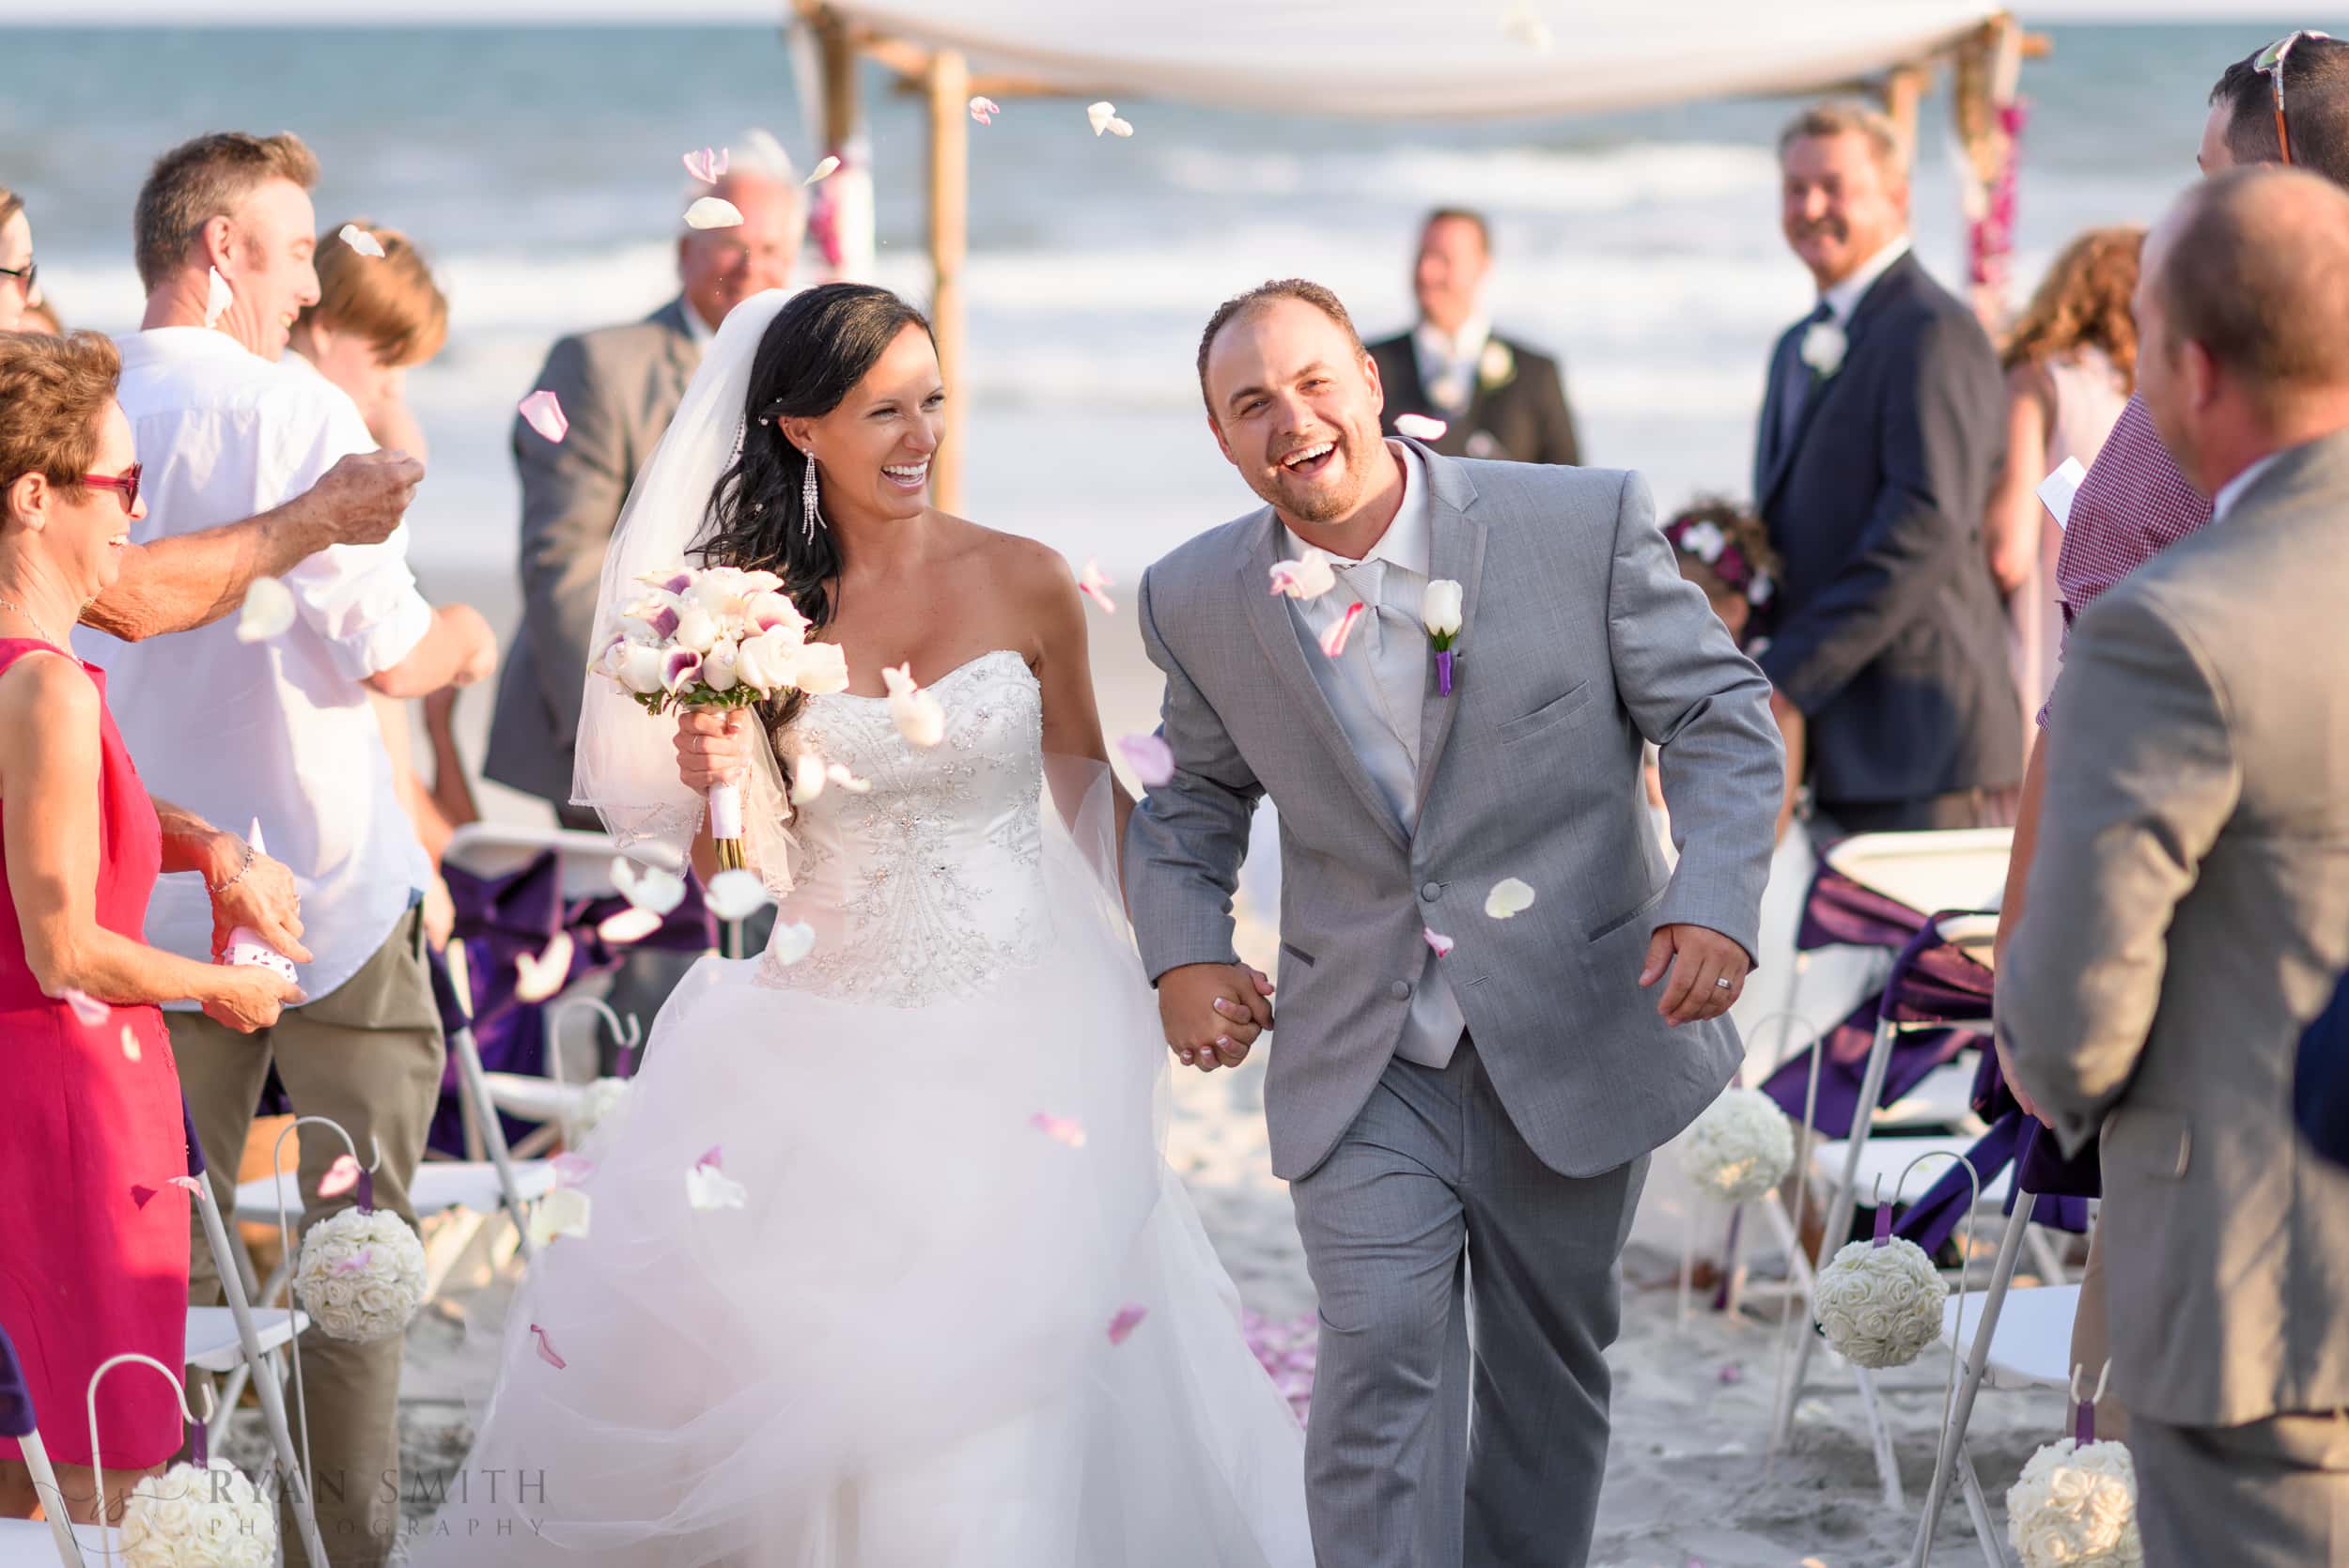 Throwing flower petals around a happy couple after ceremony - Myrtle Beach